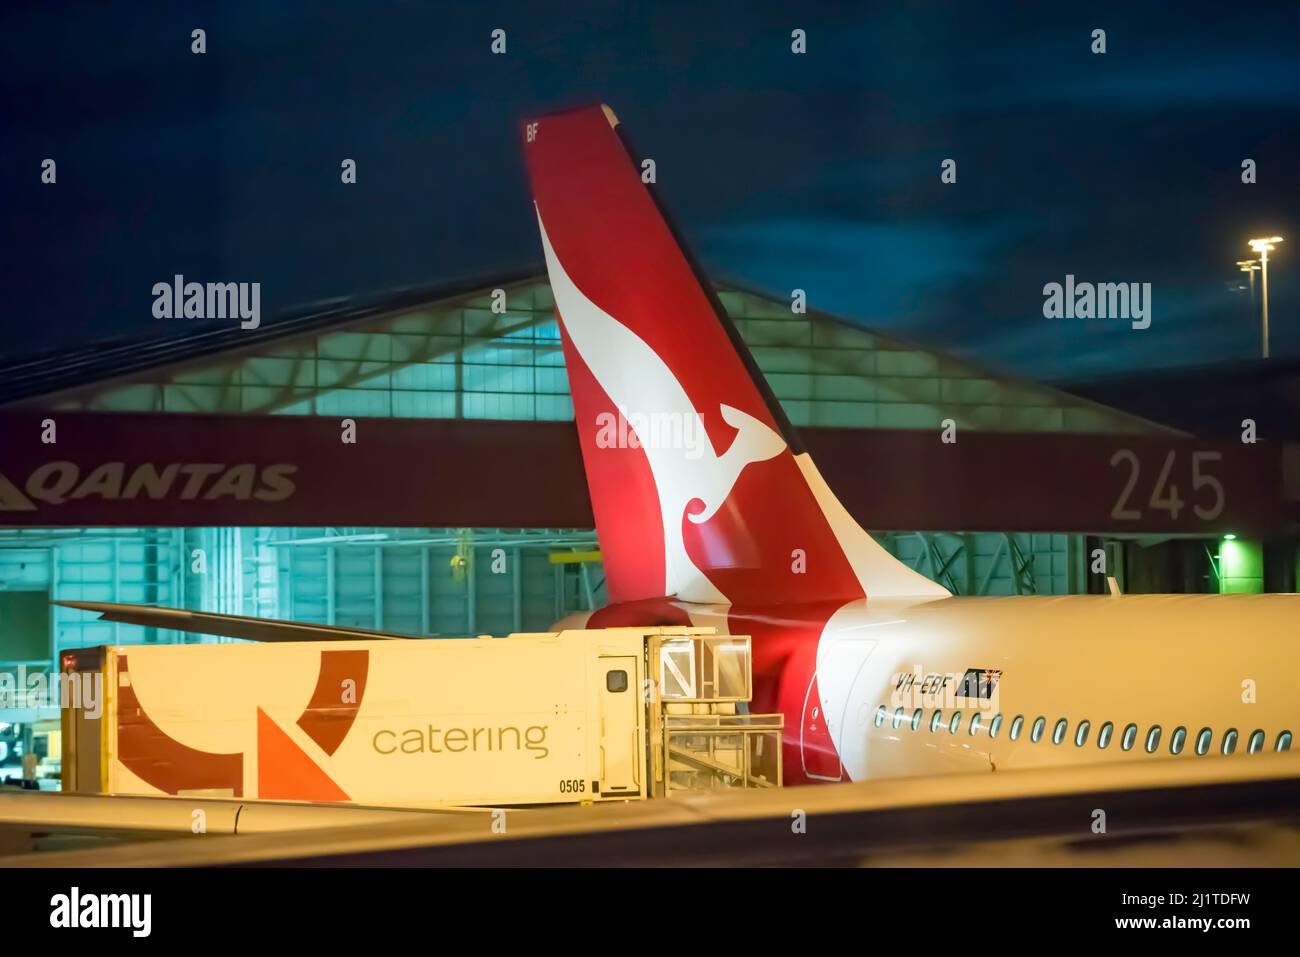 Qantas plane VH-EBF, Airbus A330-200 parked at Sydney Domestic Airport being restocked by a catering truck in the early morning predawn light Stock Photo